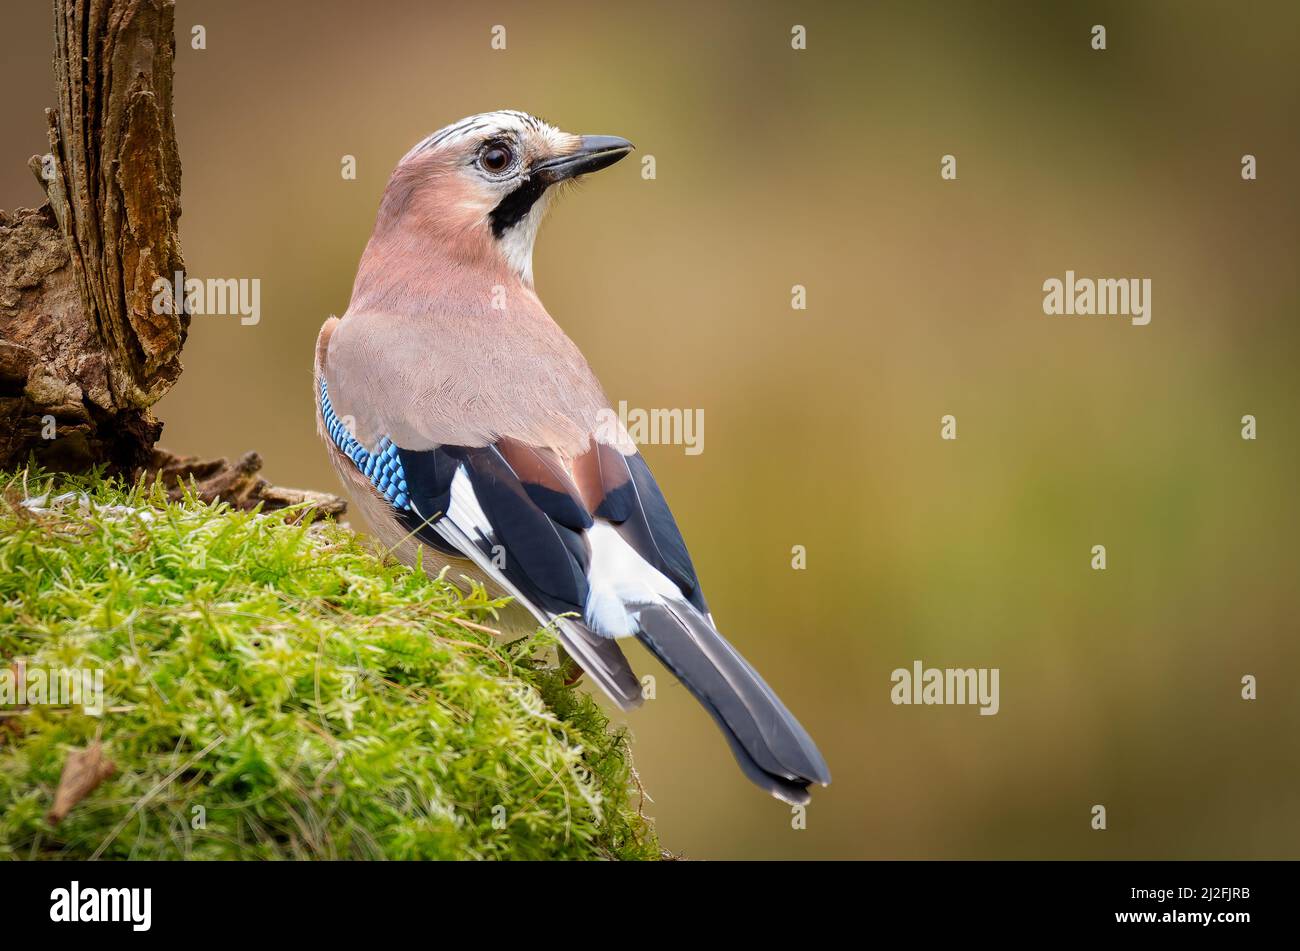 Eurasian jay, Garrulus glandarius, as it is perched on an old lichen covered tree stump. It has its back towards the camera Stock Photo